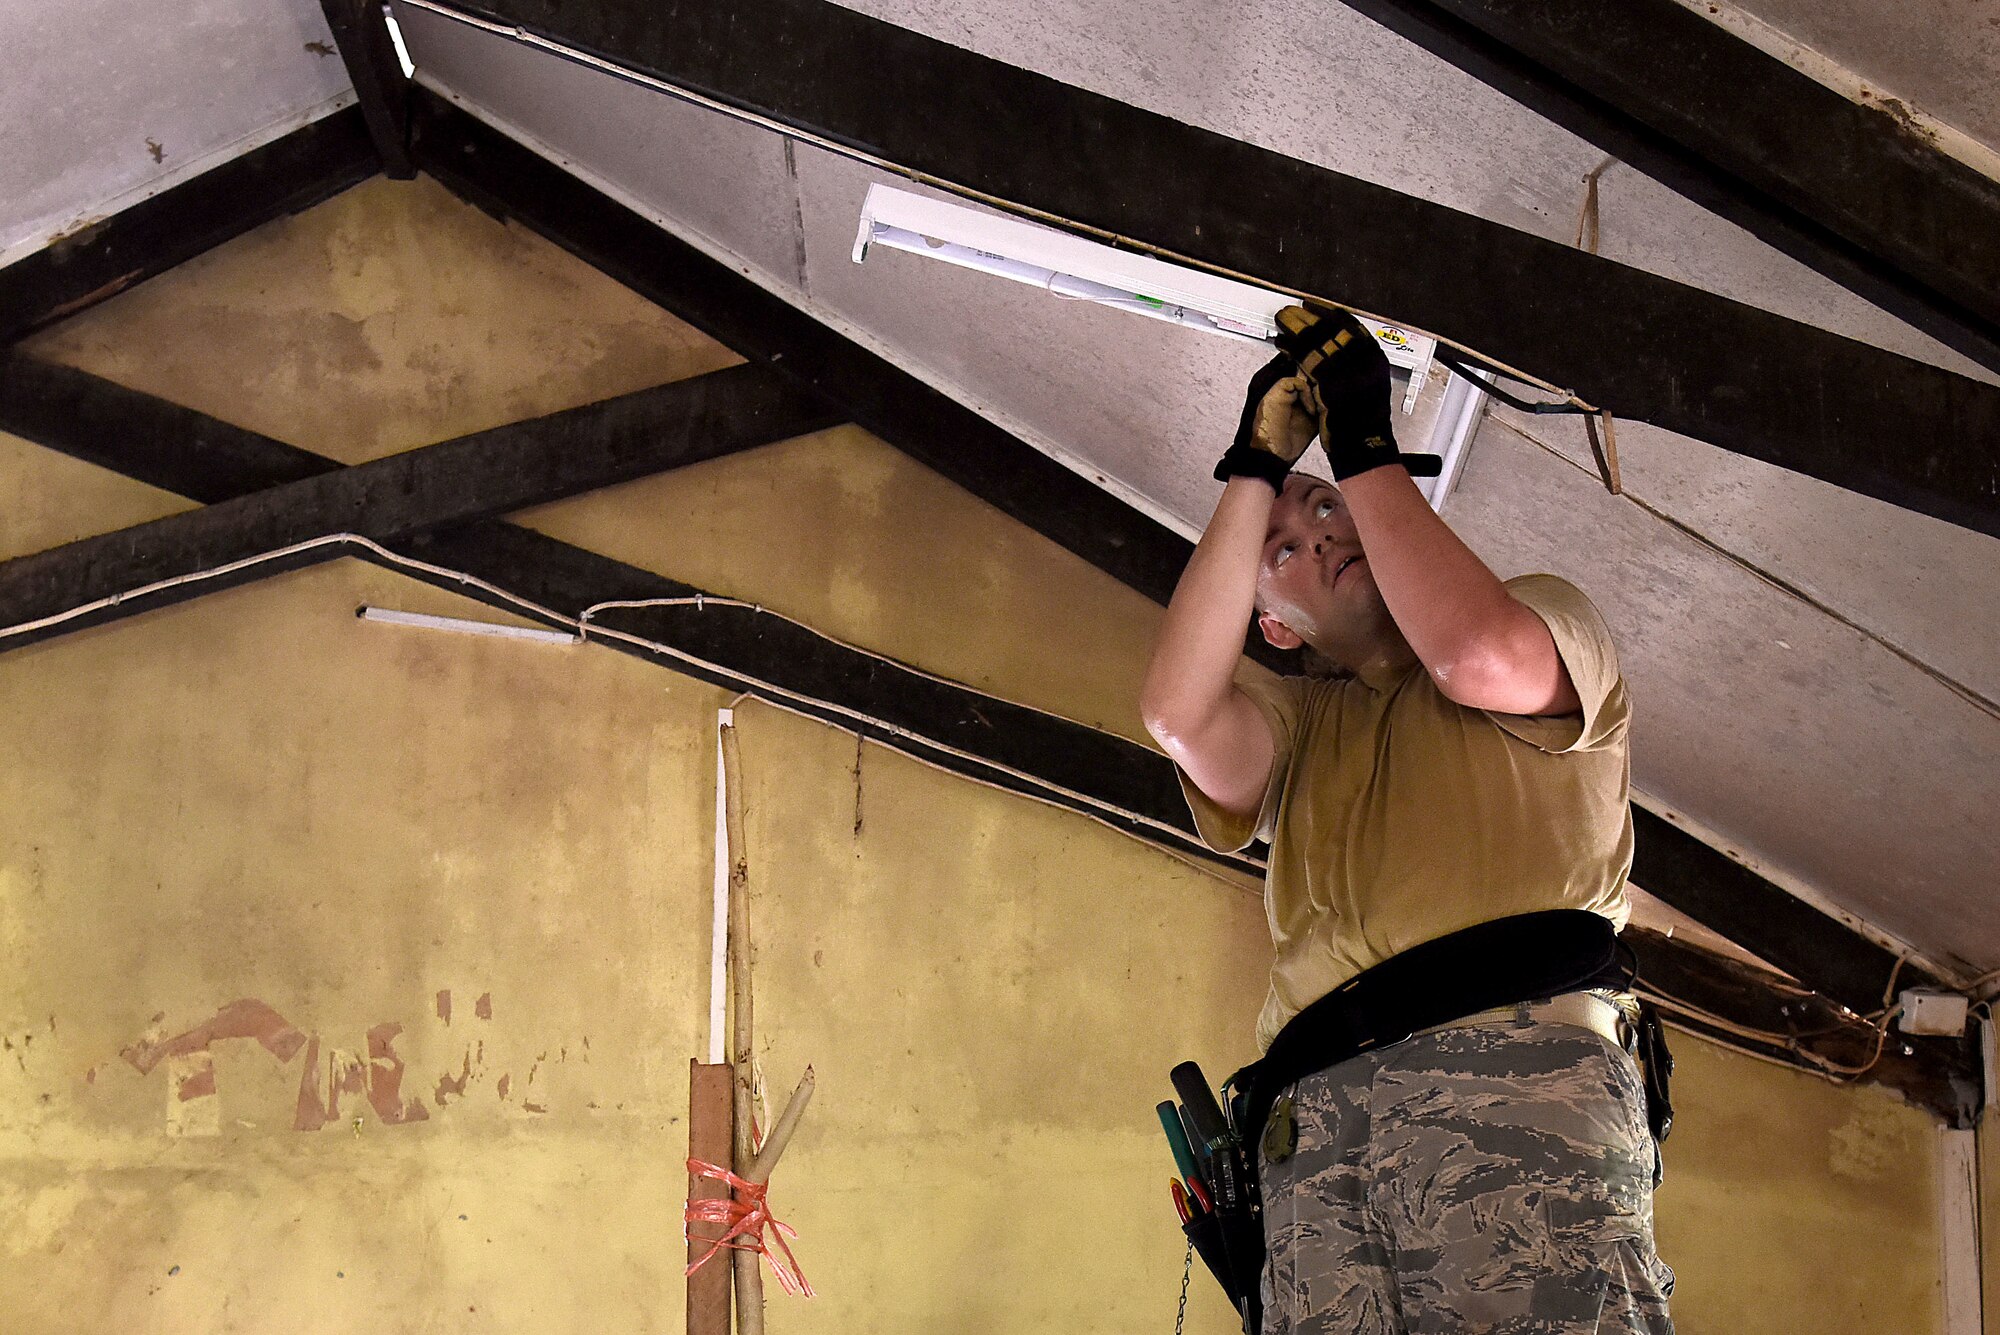 U. S. Air Force Staff Sgt. Nathan Henry, a structural journeyman with the 152nd Civil Engineer Squadron, Nevada Air National Guard, attaches a new light fixture inside one of the dormitories at Tata Primary and Secondary School during Pacific Angel 18-3 in Luganville, Espiritu Santo Island, Vanuatu, July 14, 2018.